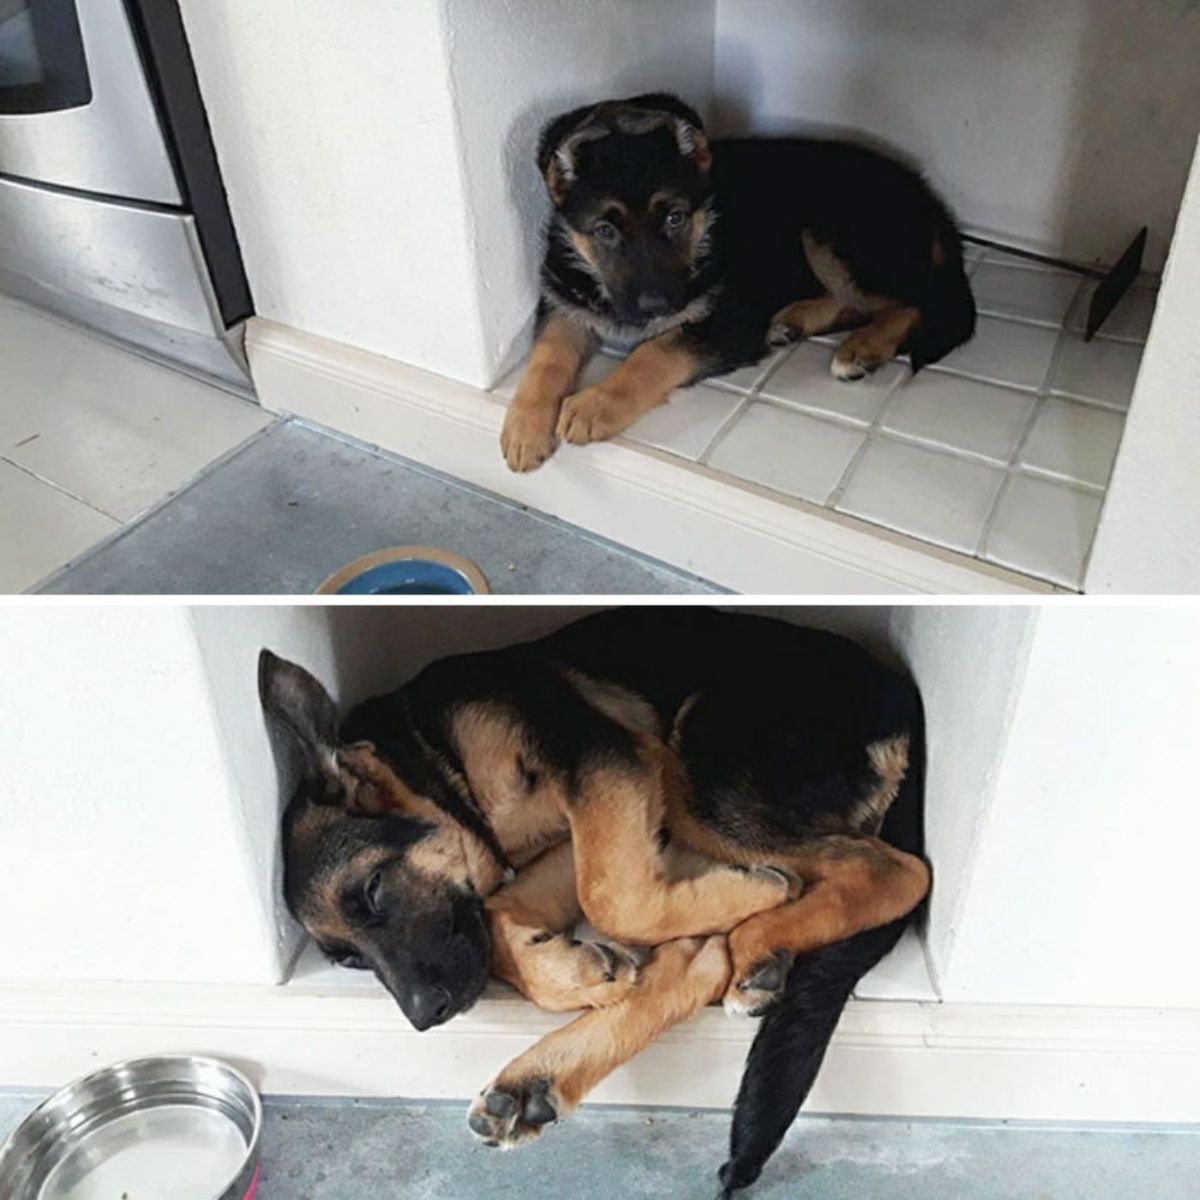 1 photo of german shepherd puppy fititng into a small white space in a wall and 1 photo of the same dog grown dog sleeping all squished in there